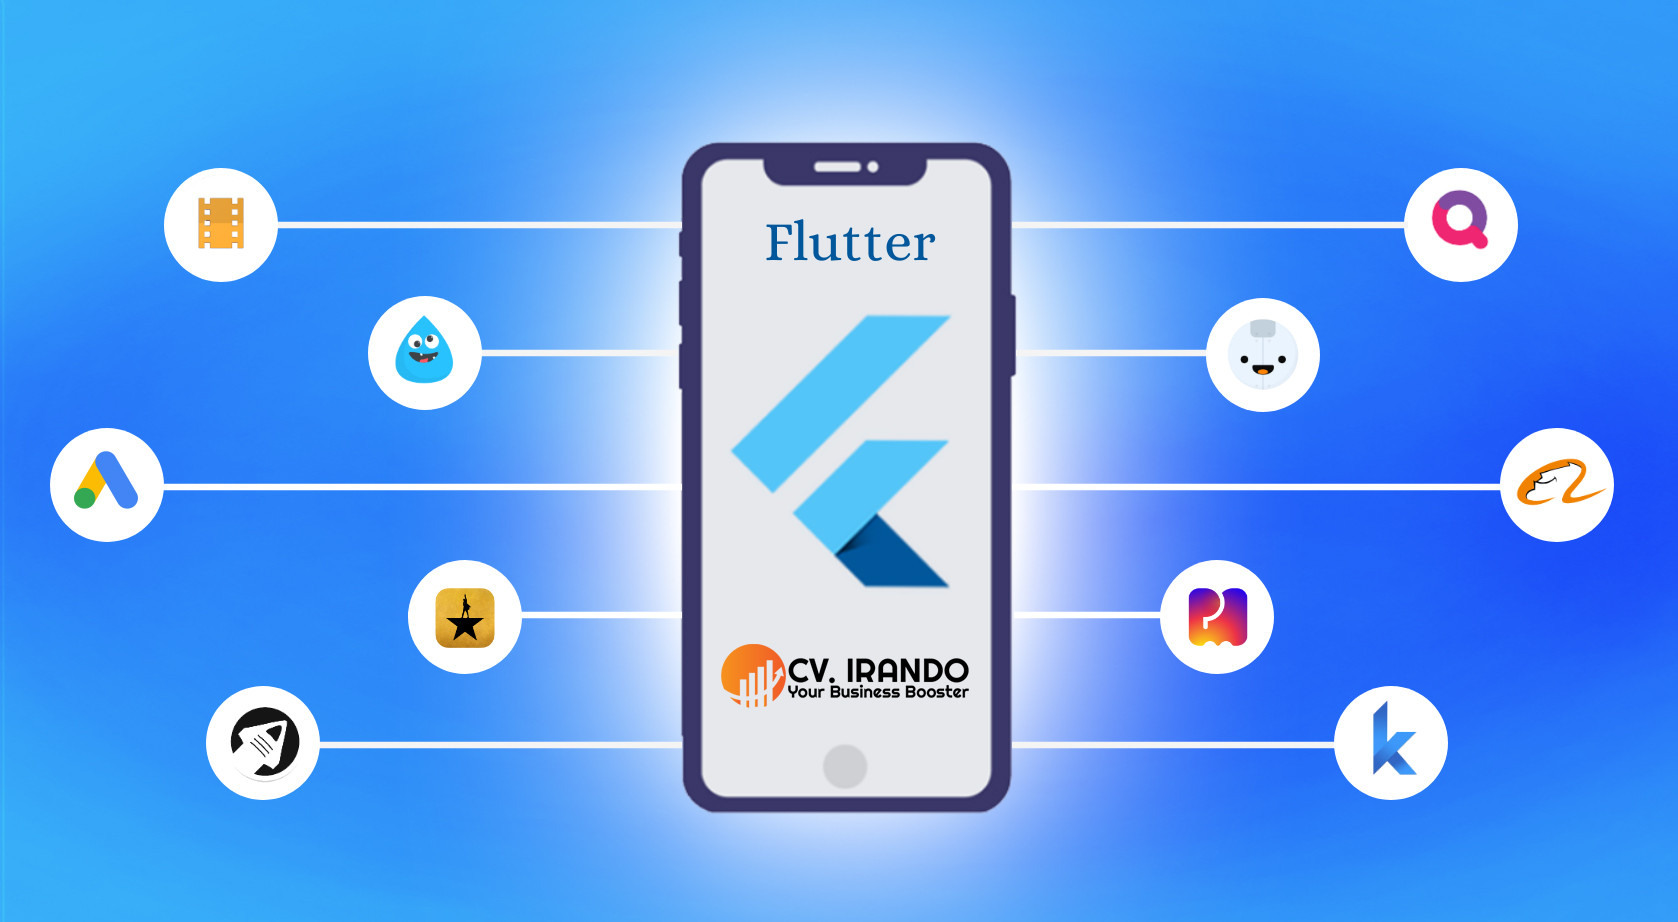 How to add border to a widget in flutter